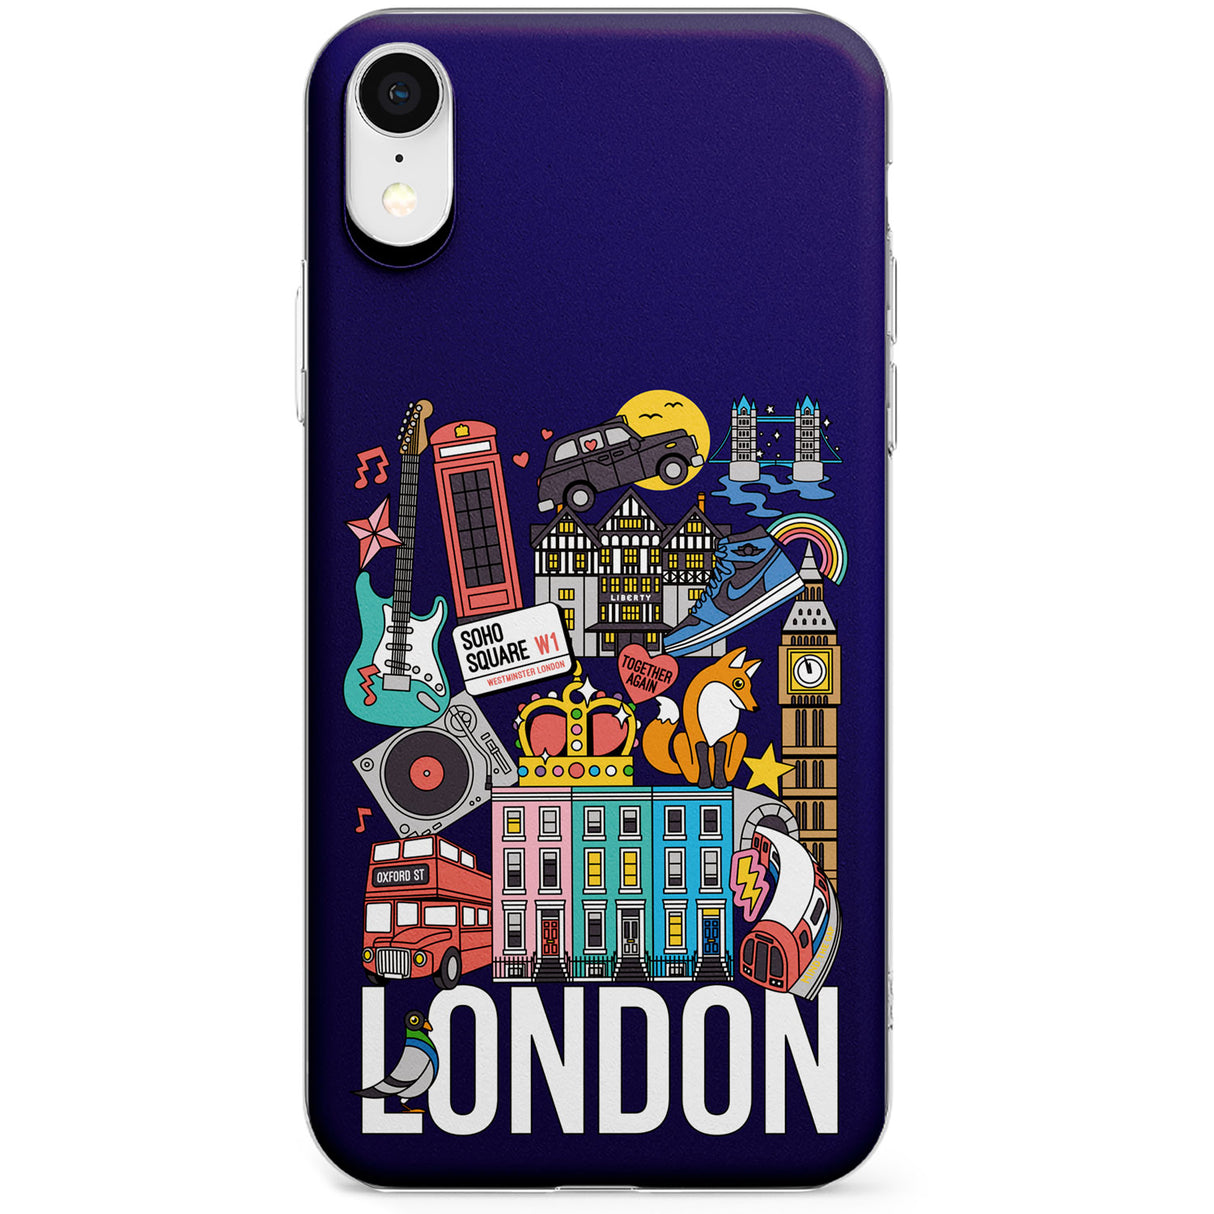 London Calling Phone Case for iPhone X, XS Max, XR